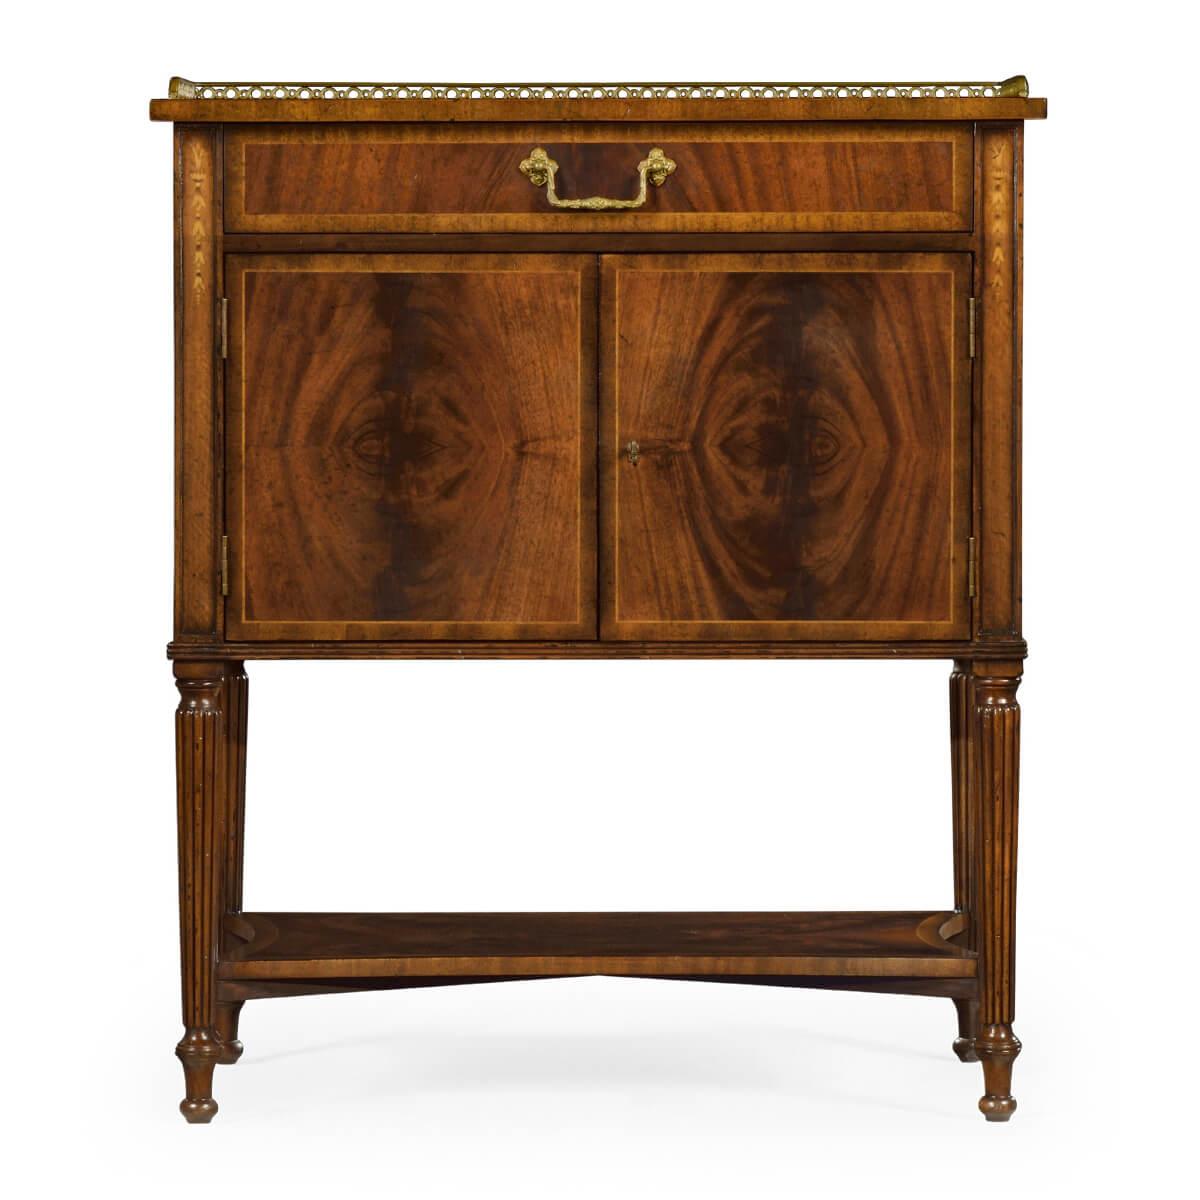 A pair of English Regency style mahogany side table or bedside table with mahogany crotch veneer, oak secondary wood, finely pierced patinated brass gallery, crossbanding and bellflower inlays, a long single drawer above a two-door cupboard with an